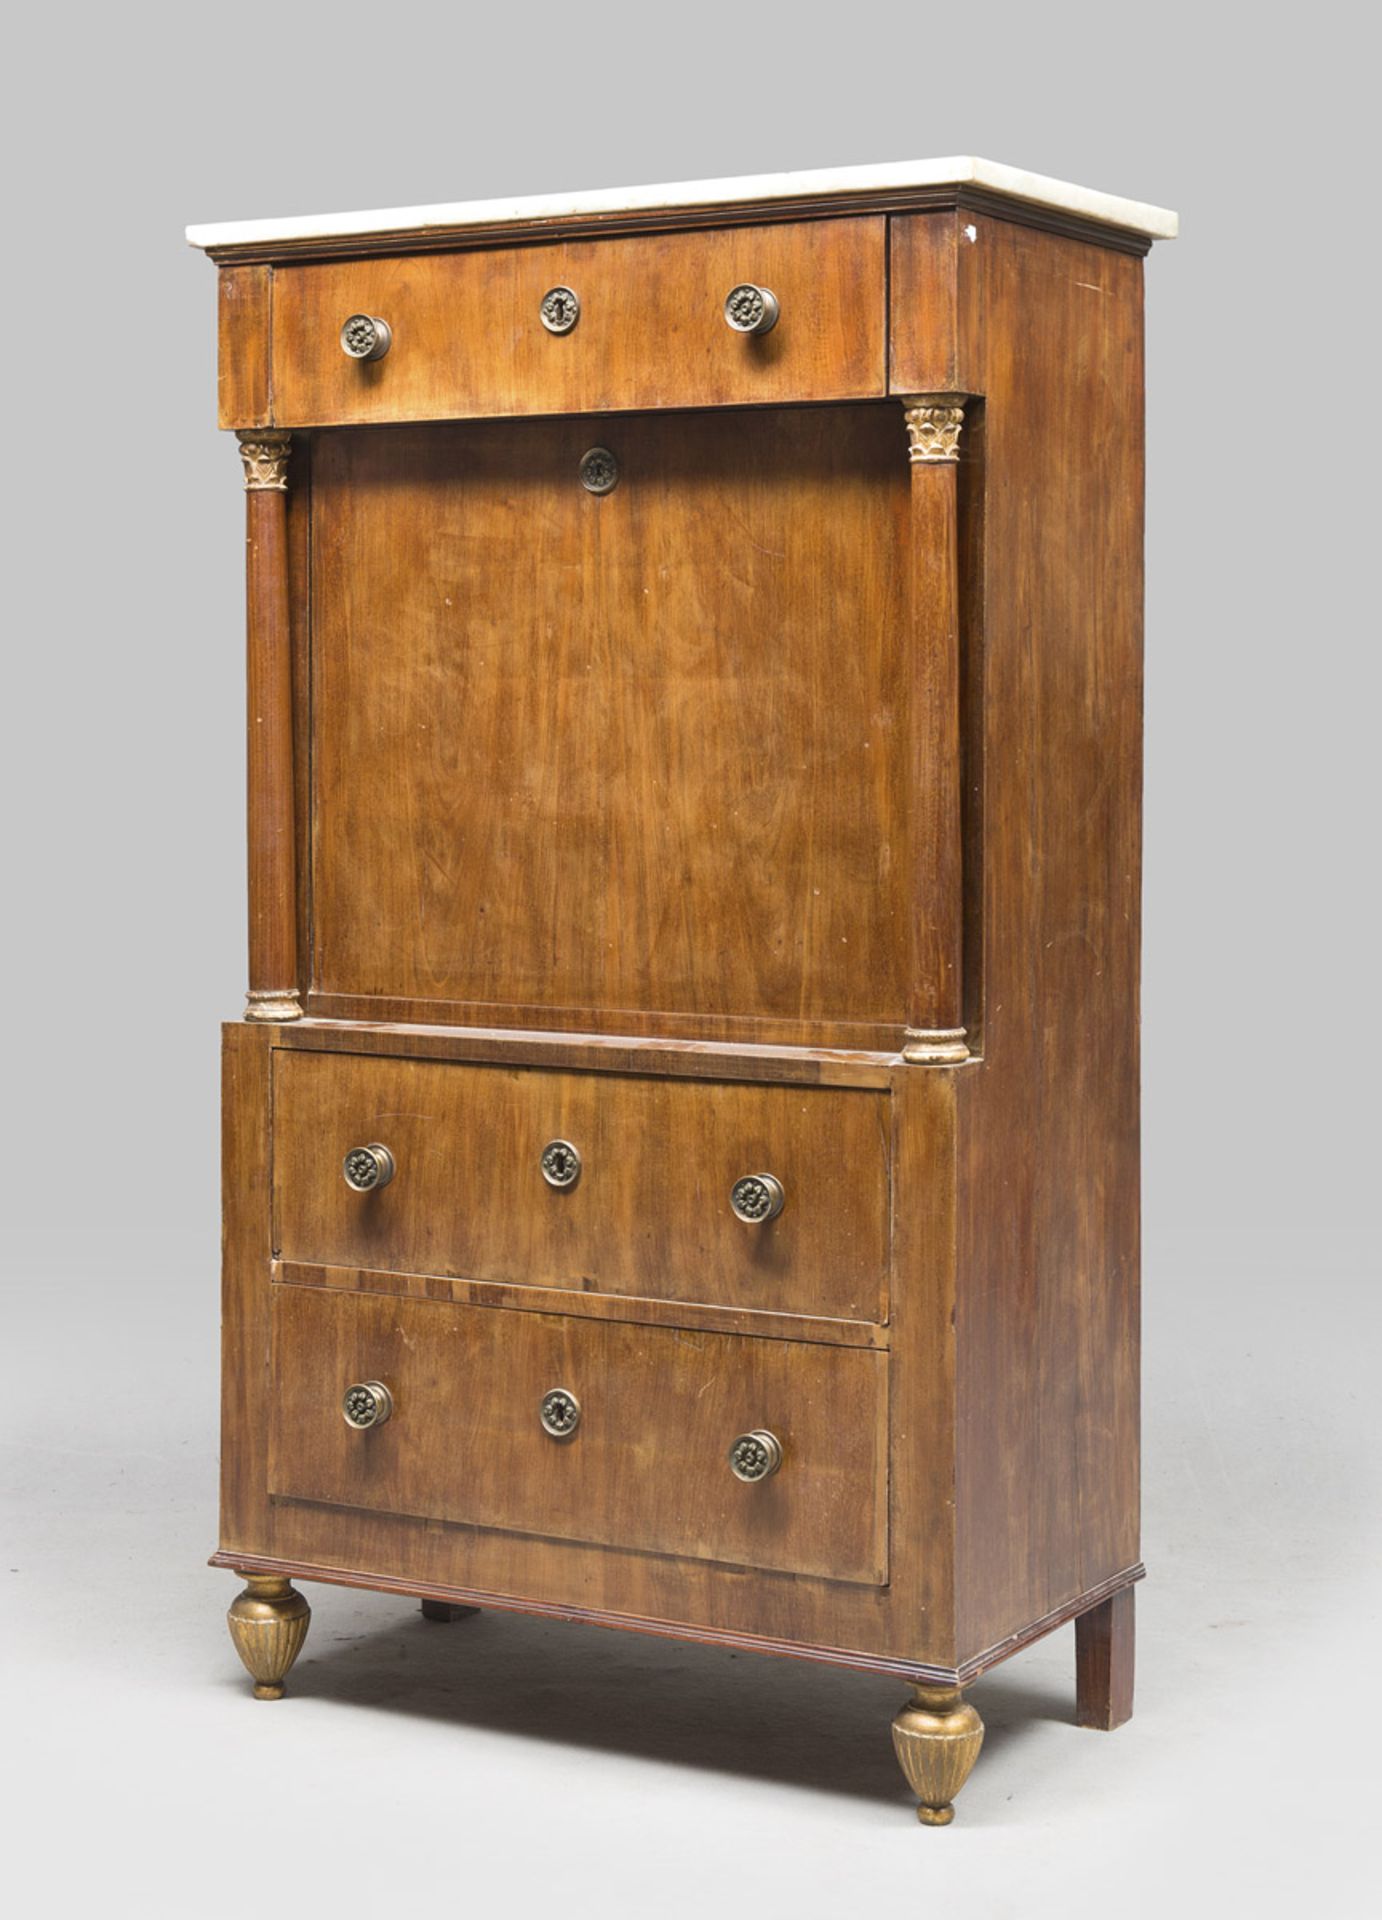 BEAUTIFUL SECRETAIRE IN WALNUT, CENTRAL ITALY 19TH CENTURY front with one drawer in the upper part